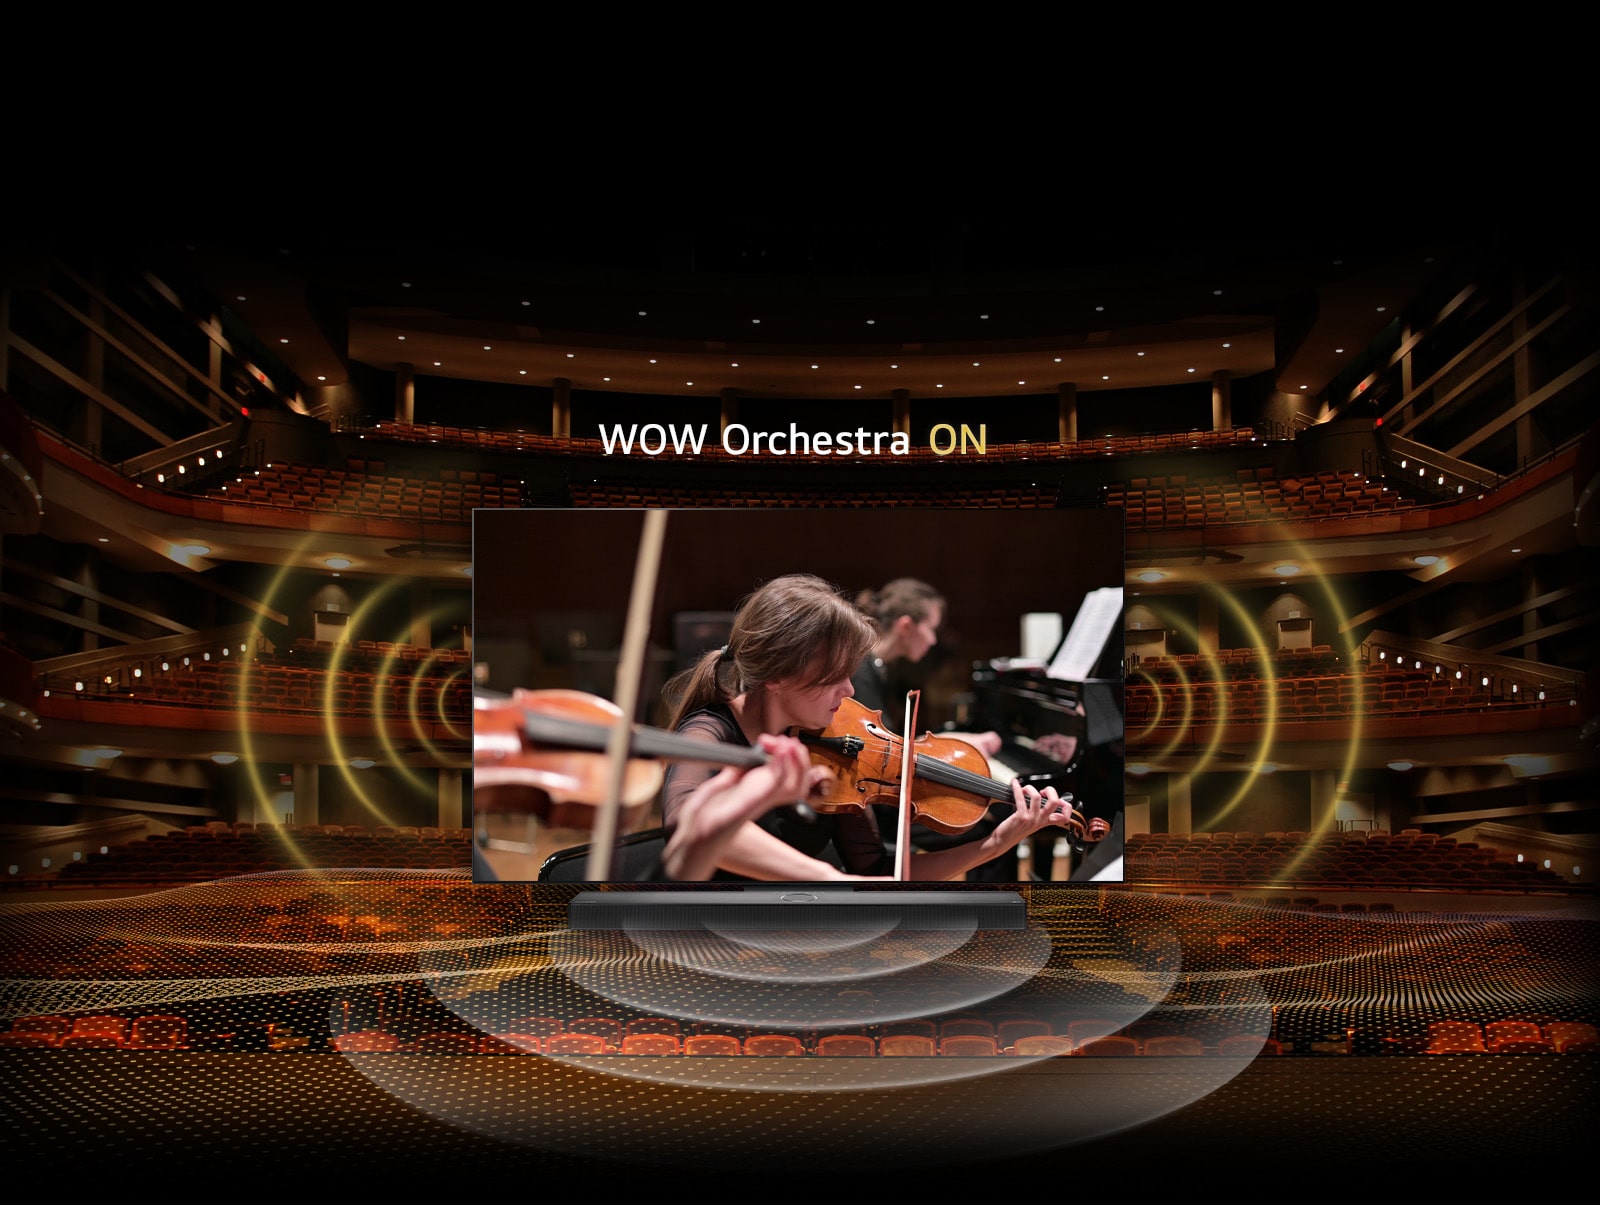 A sound effect is displayed with the Wow orchestra function activated.